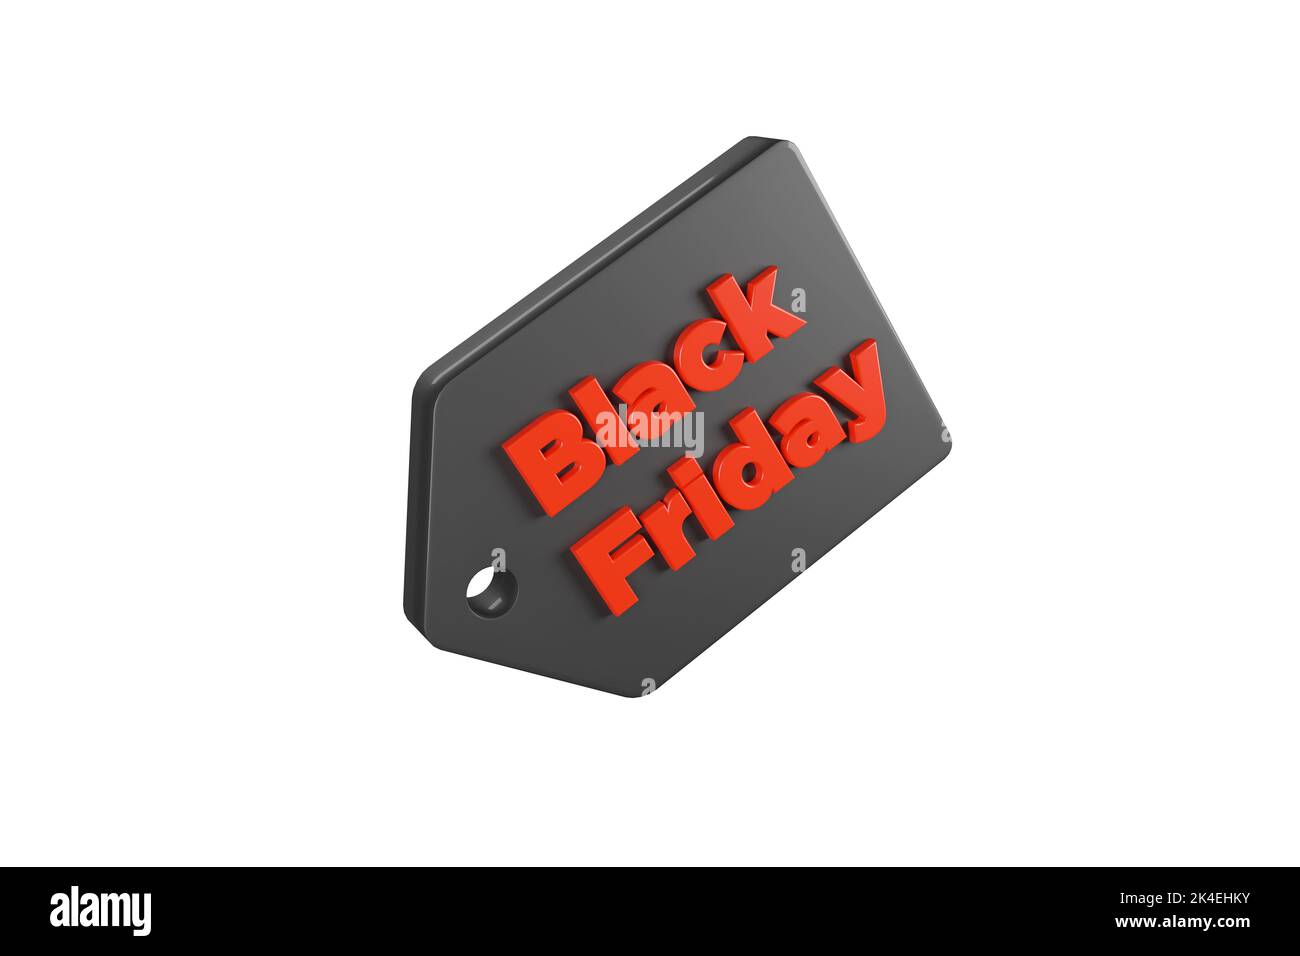 Black friday Promotional label isolated on a white background. 3d illustration. Stock Photo